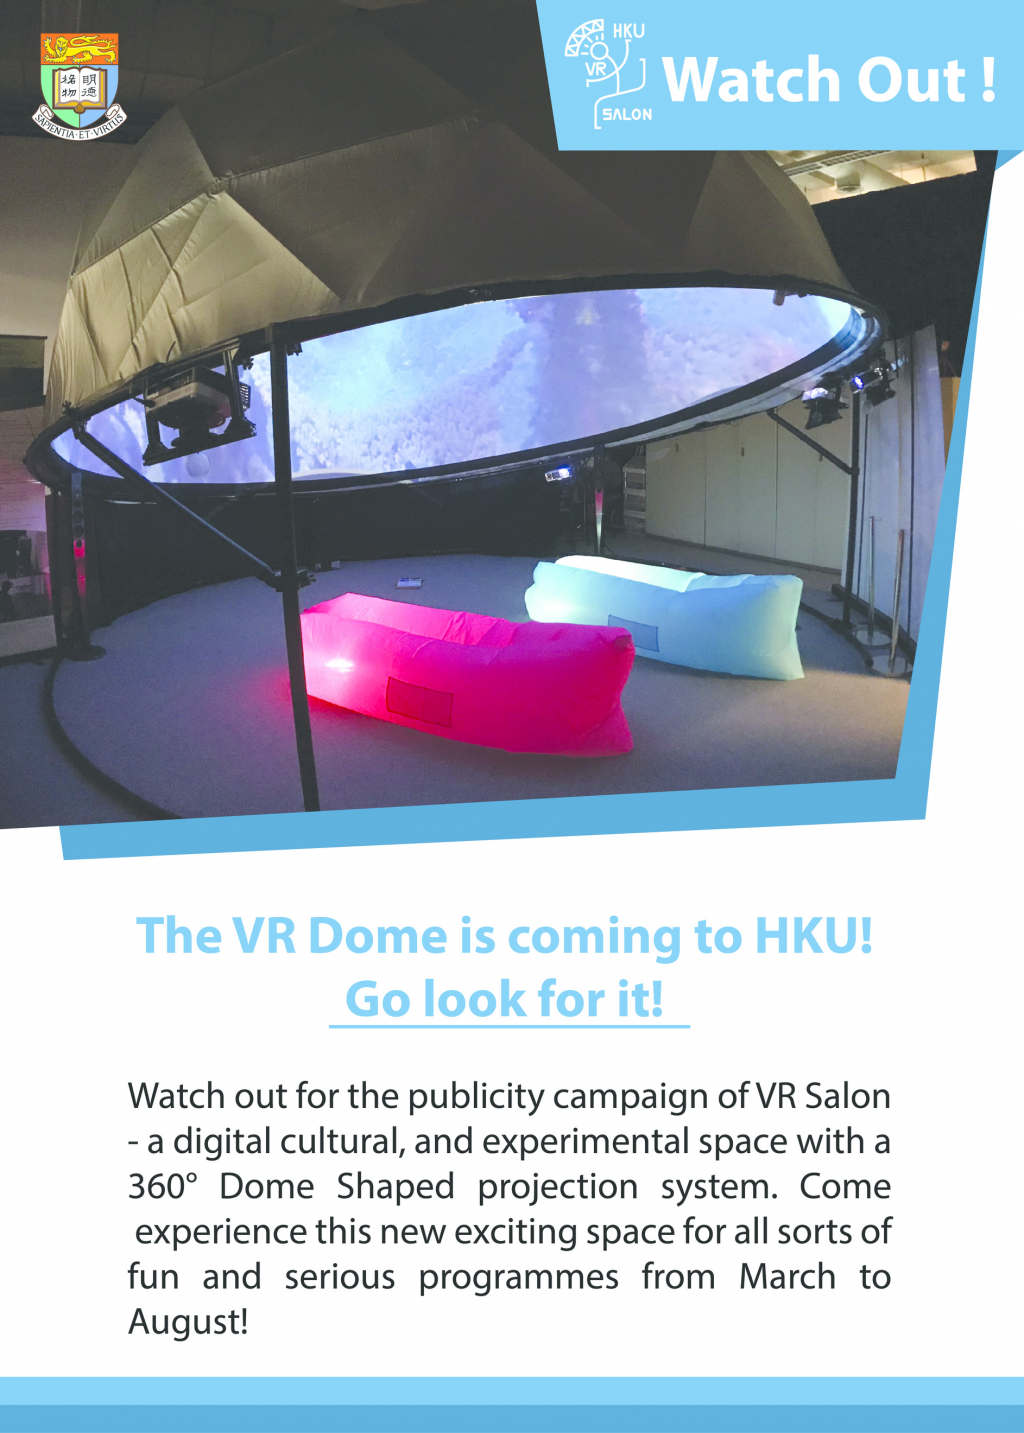 Where is the VR Dome?